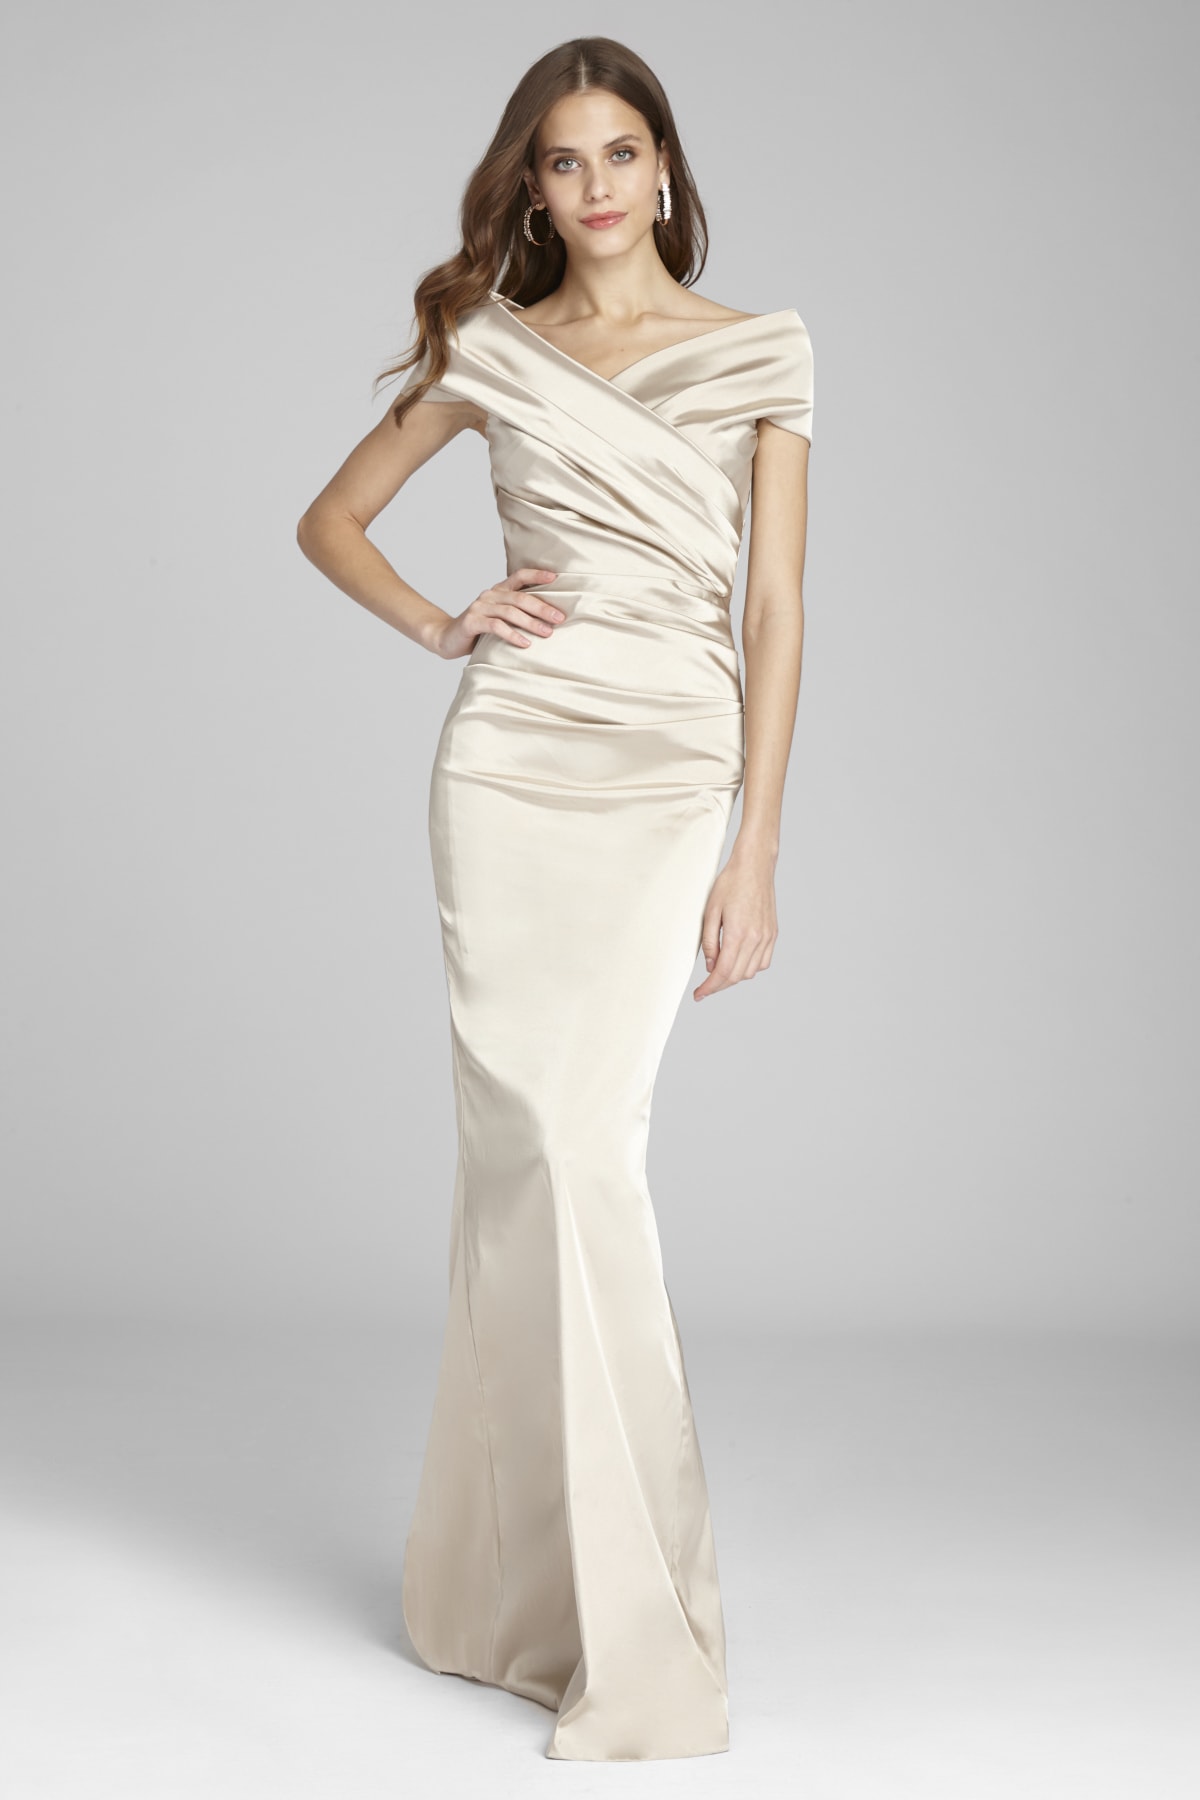 Beaded Gowns For Mother Of The Bride Dresses - Global Leisure Lounge